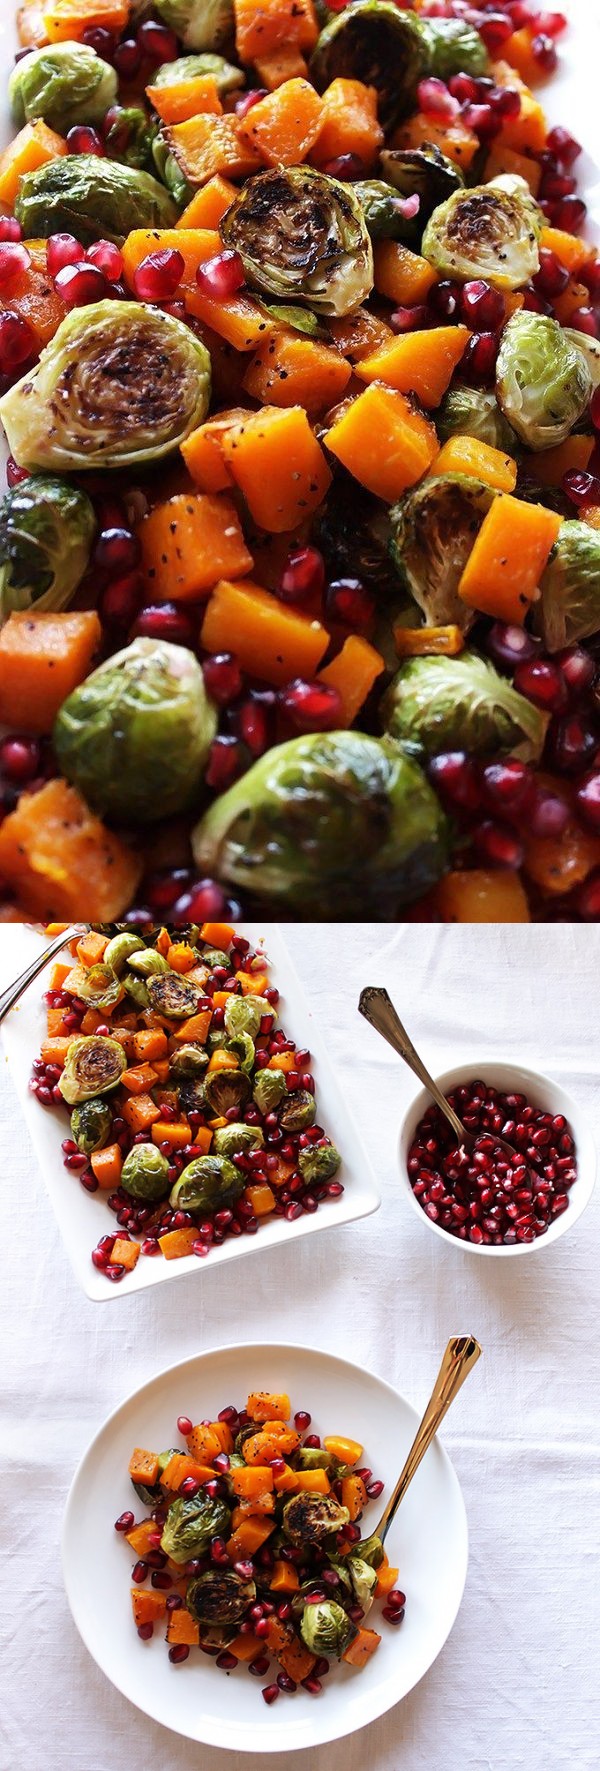 Roasted Butternut Squash and Brussels Sprouts with Pomegranate